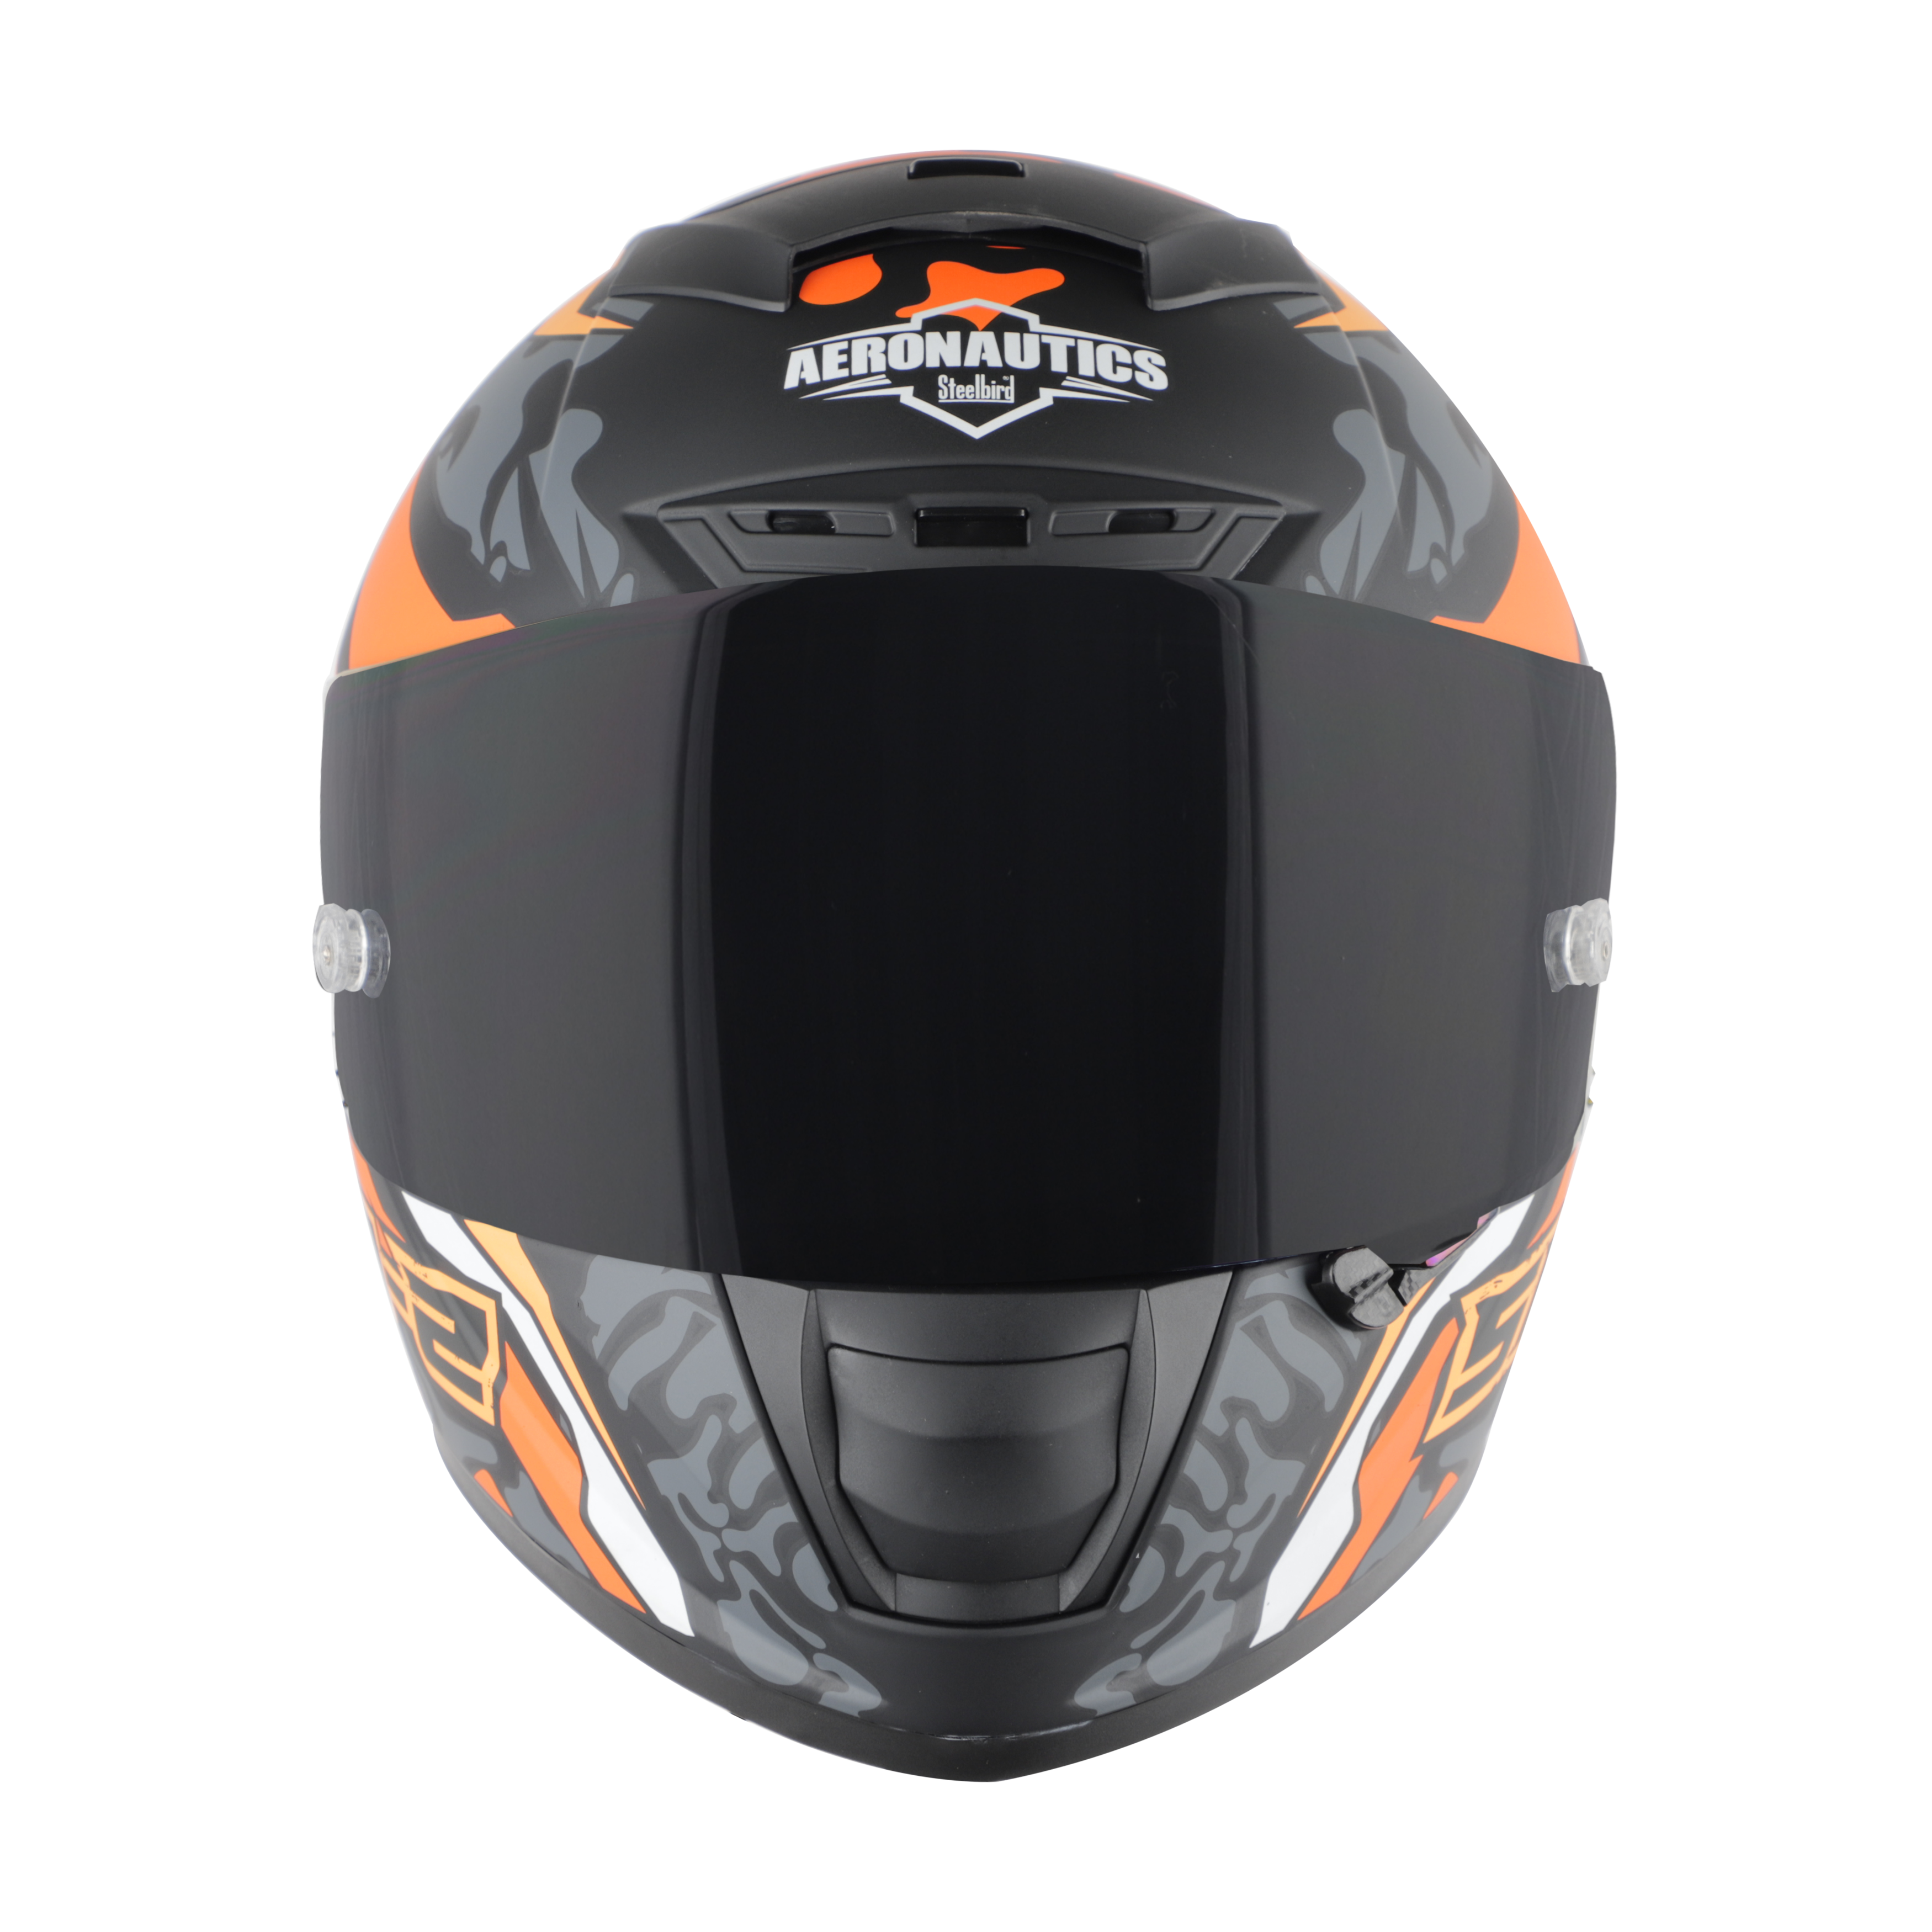 SA-2 TERMINATOR 3.0 GLOSSY BLACK WITH ORANGE FITTED WITH CLEAR VISOR EXTRA SMOKE VISOR FREE (WITH ANTI-FOR SHIELD HOLDER)